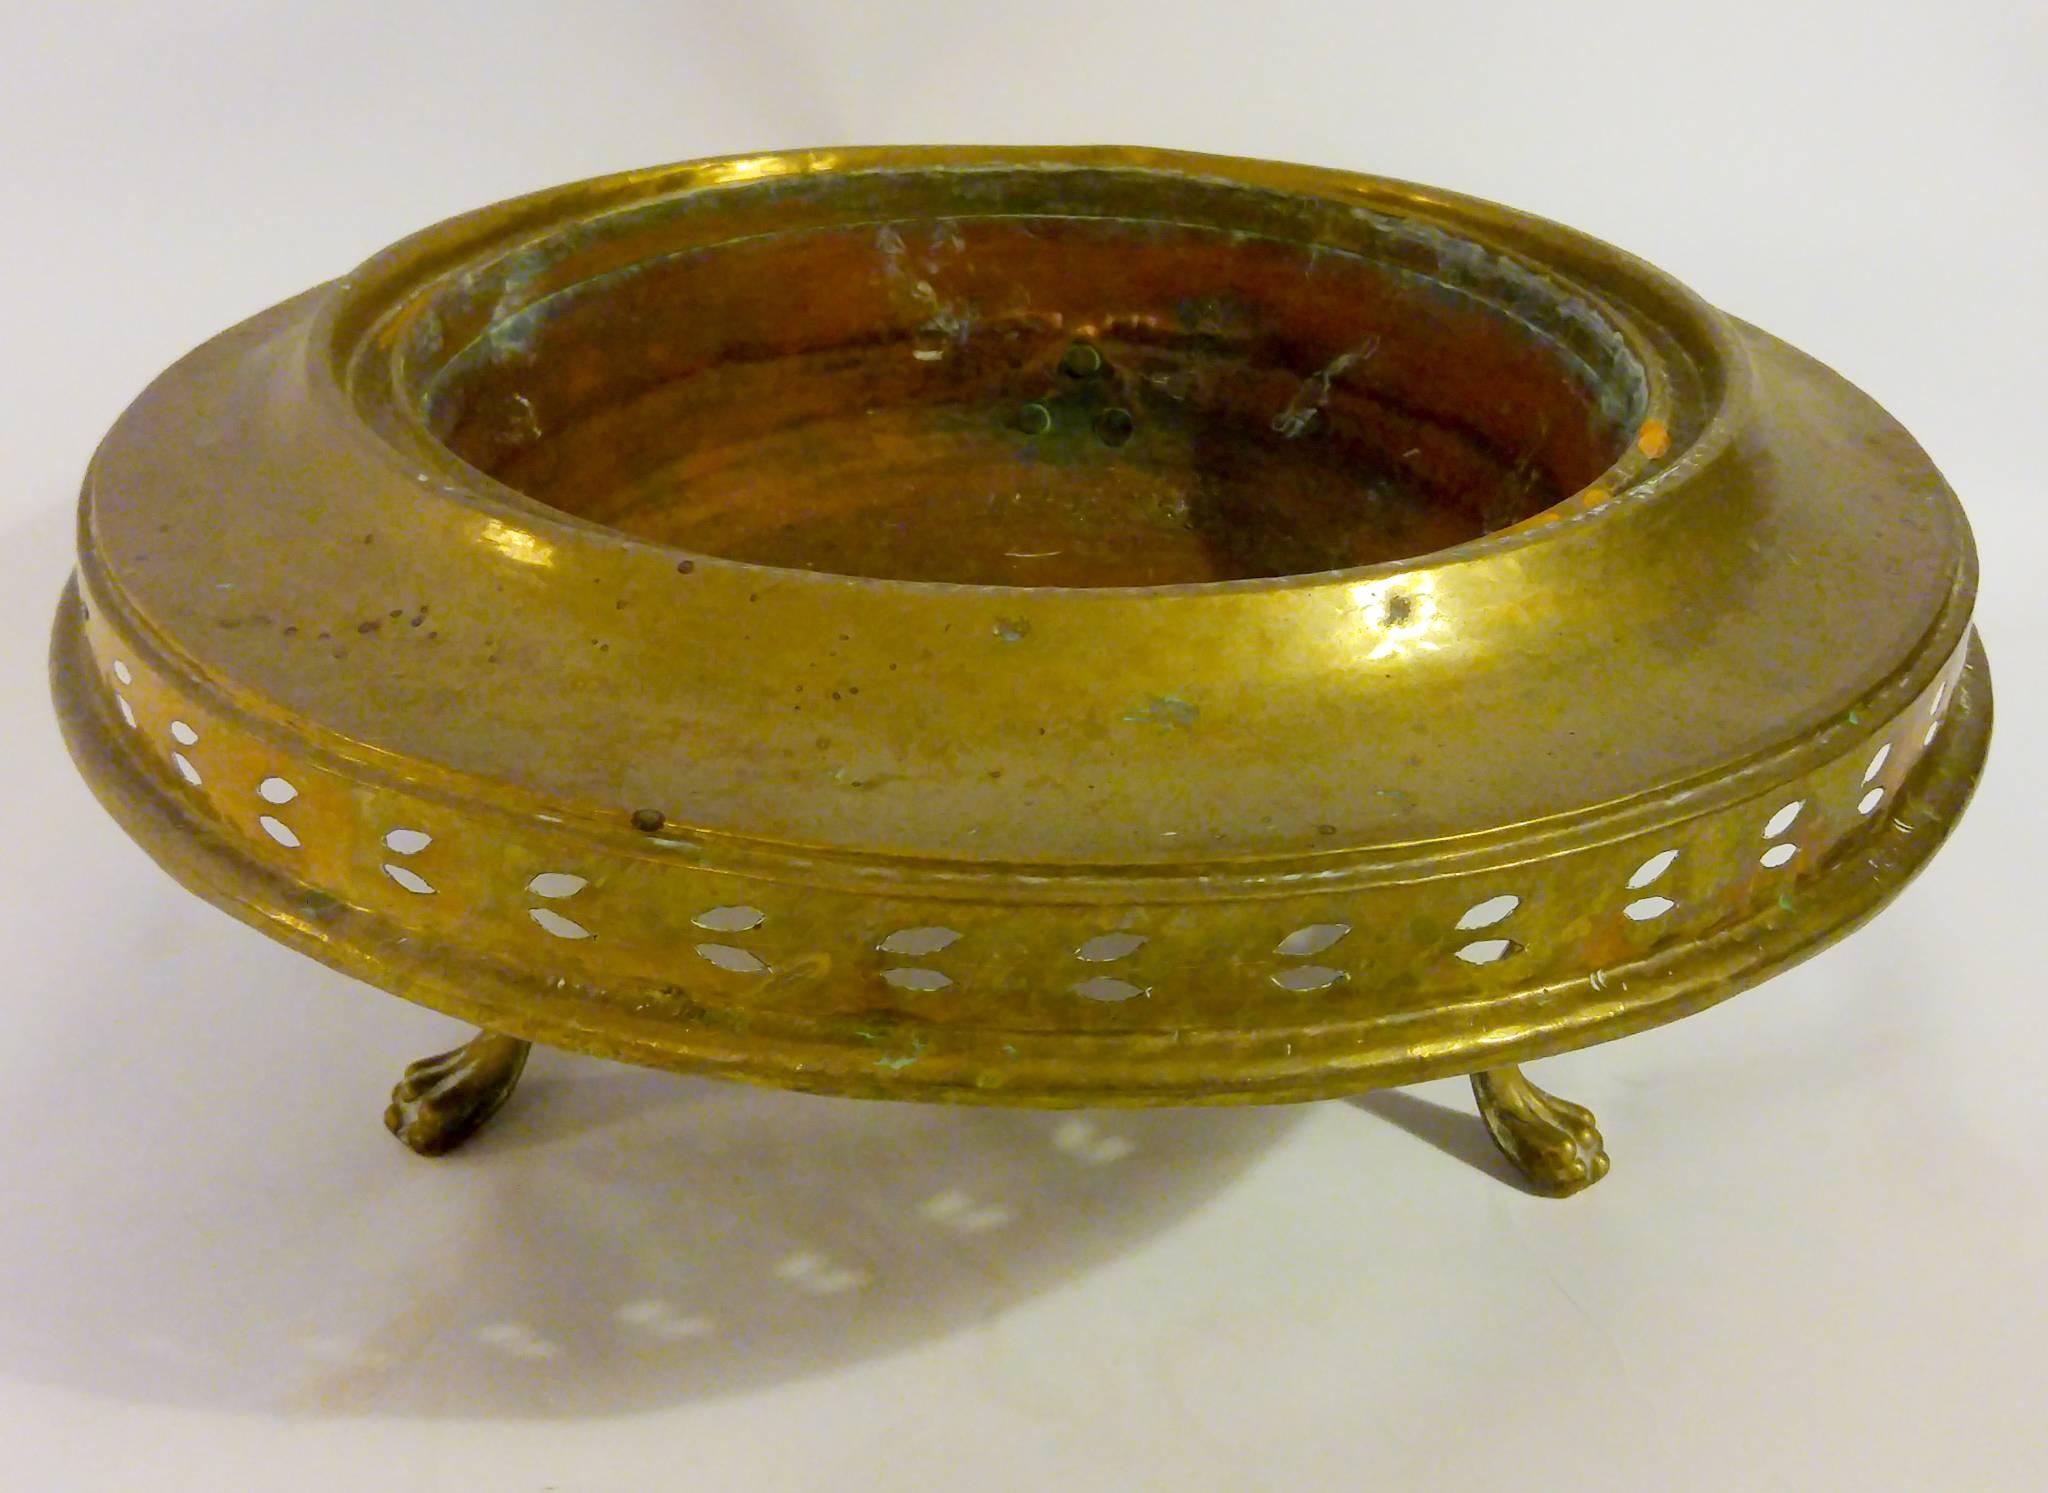 Large size brass Turkish brazier featuring pierced body and female figueral topper. The serpentine feet end in lion's paws. The copper bowl liner used for burning solid fuel, usually charcoal. Braziers principally provide heat, but may also be used